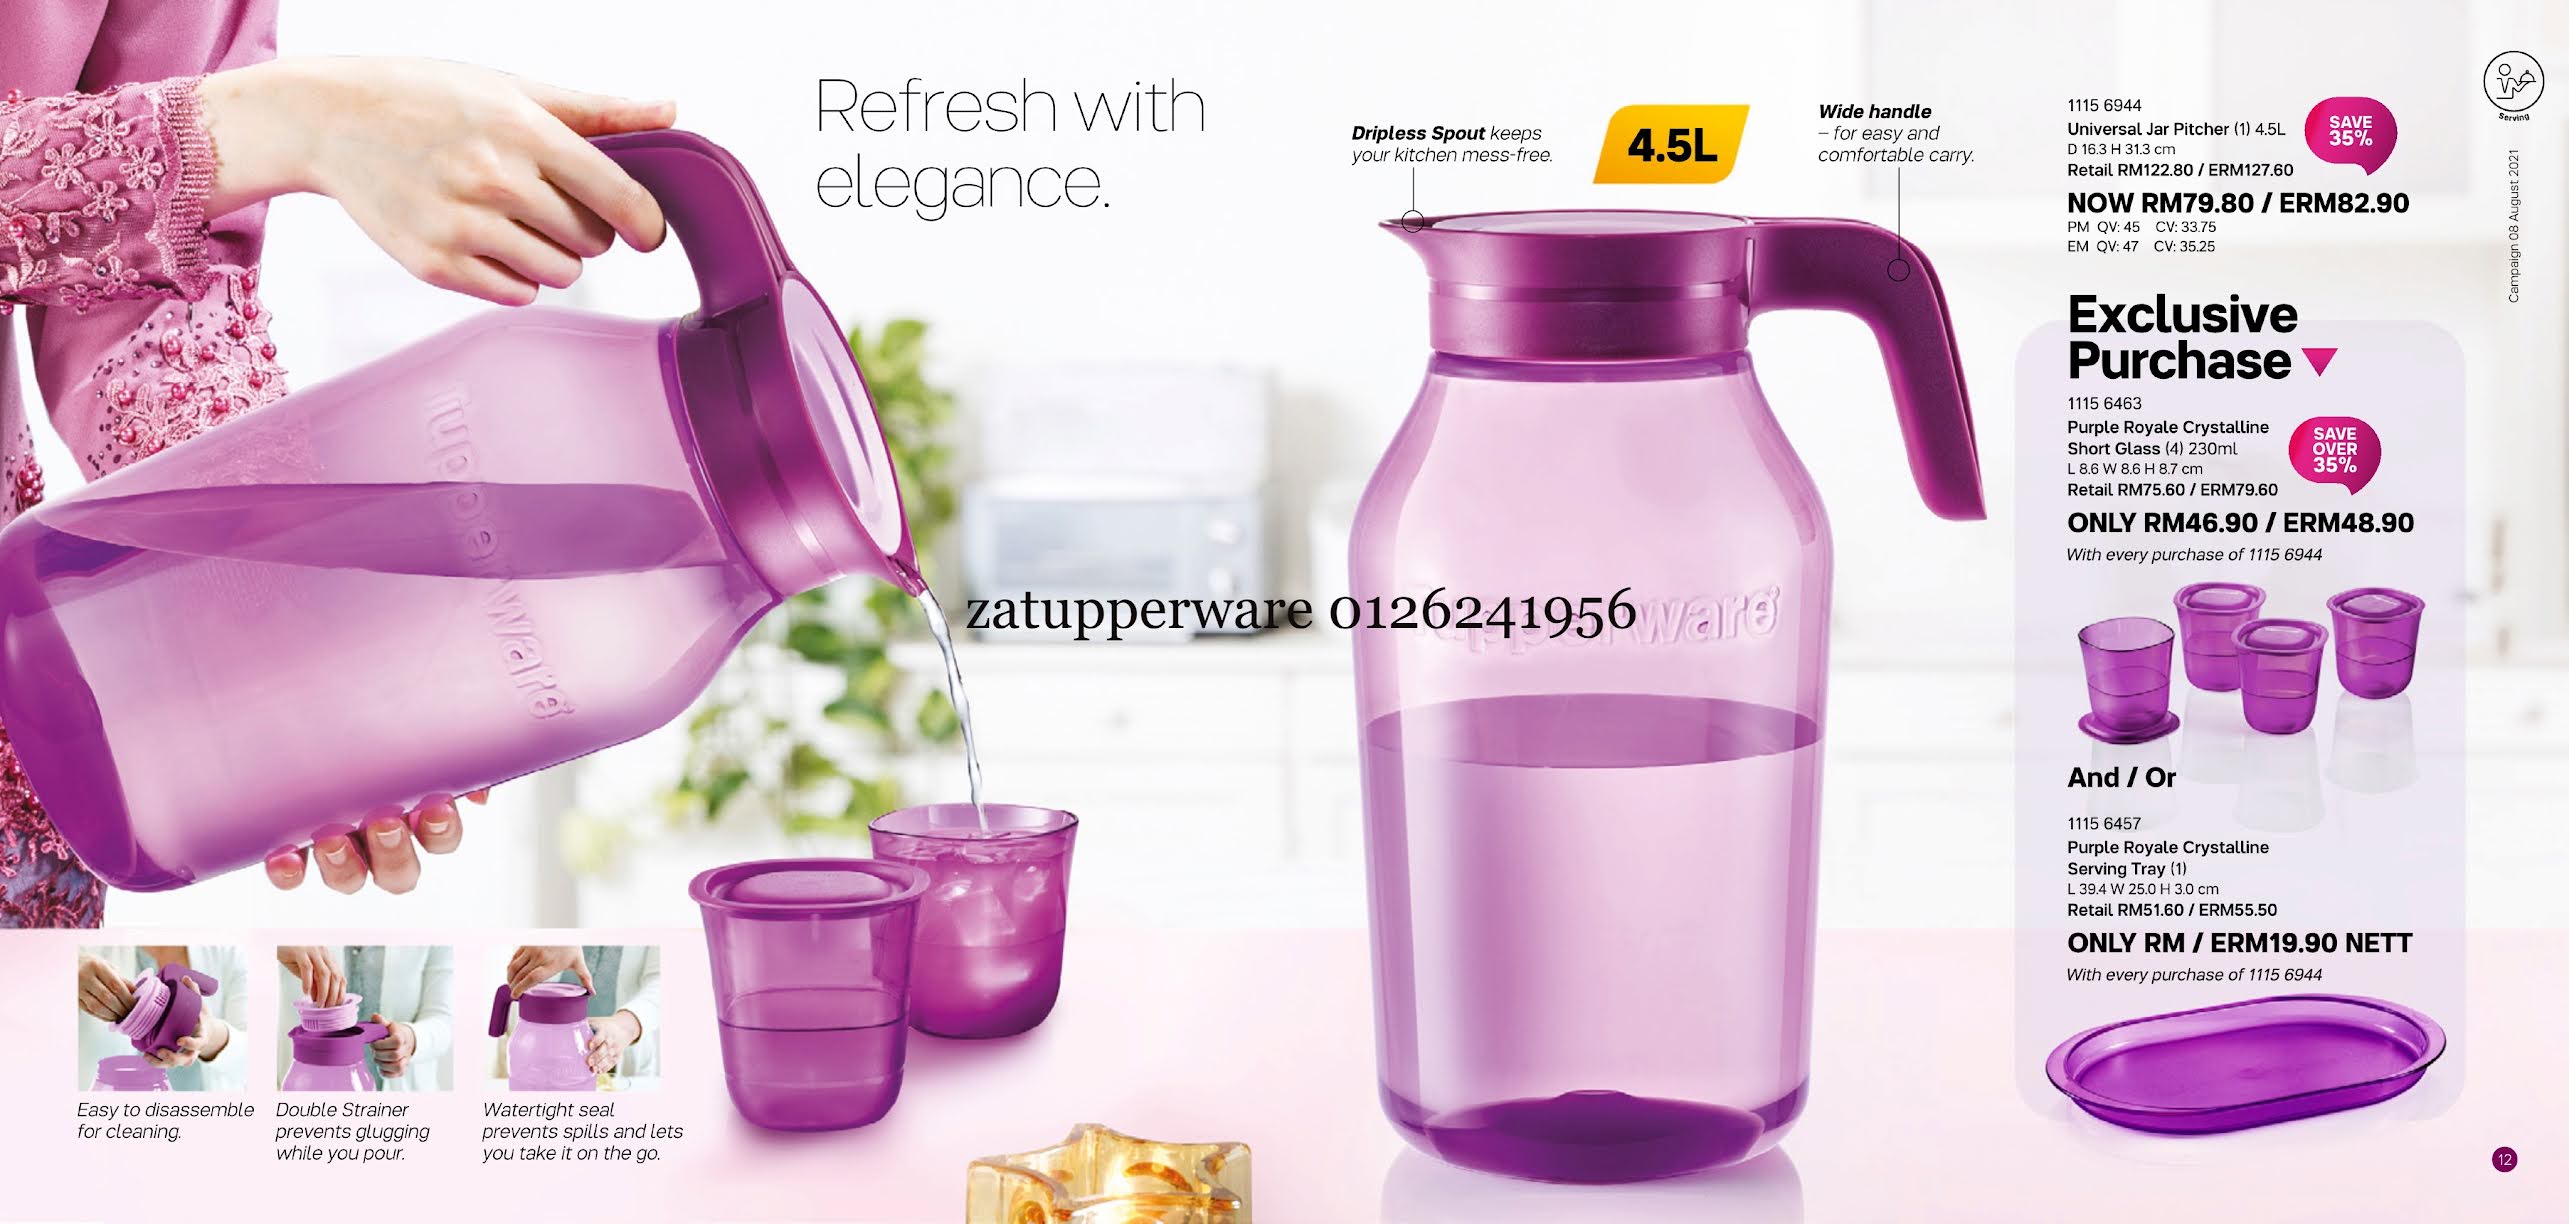 2021 tupperware catalogue august Your Tupperware